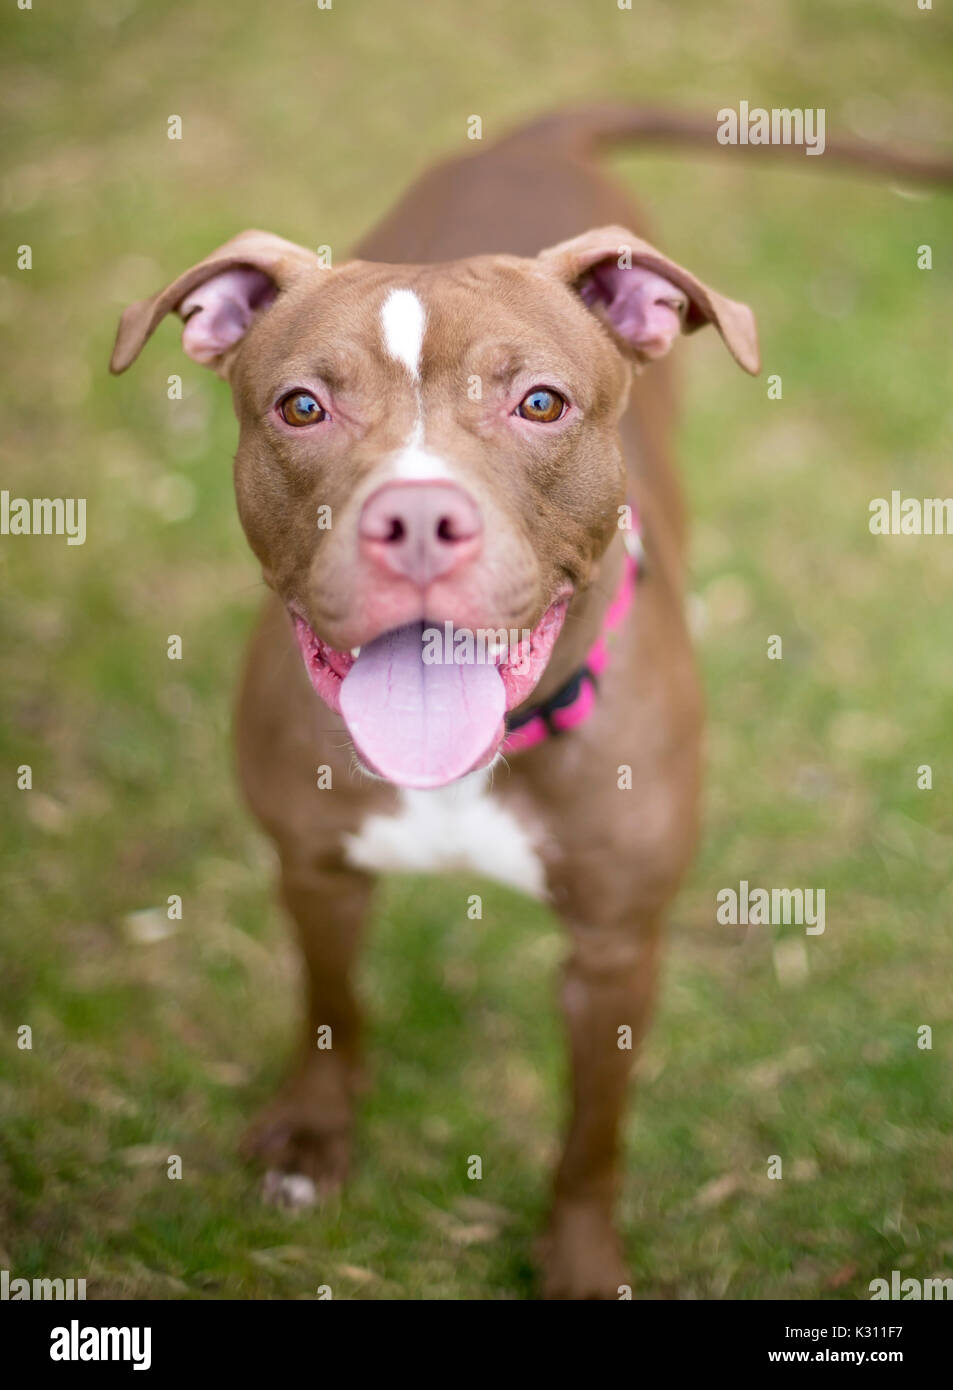 A red and white Pit Bull Terrier mixed breed dog with a happy expression, wearing a pink collar Stock Photo